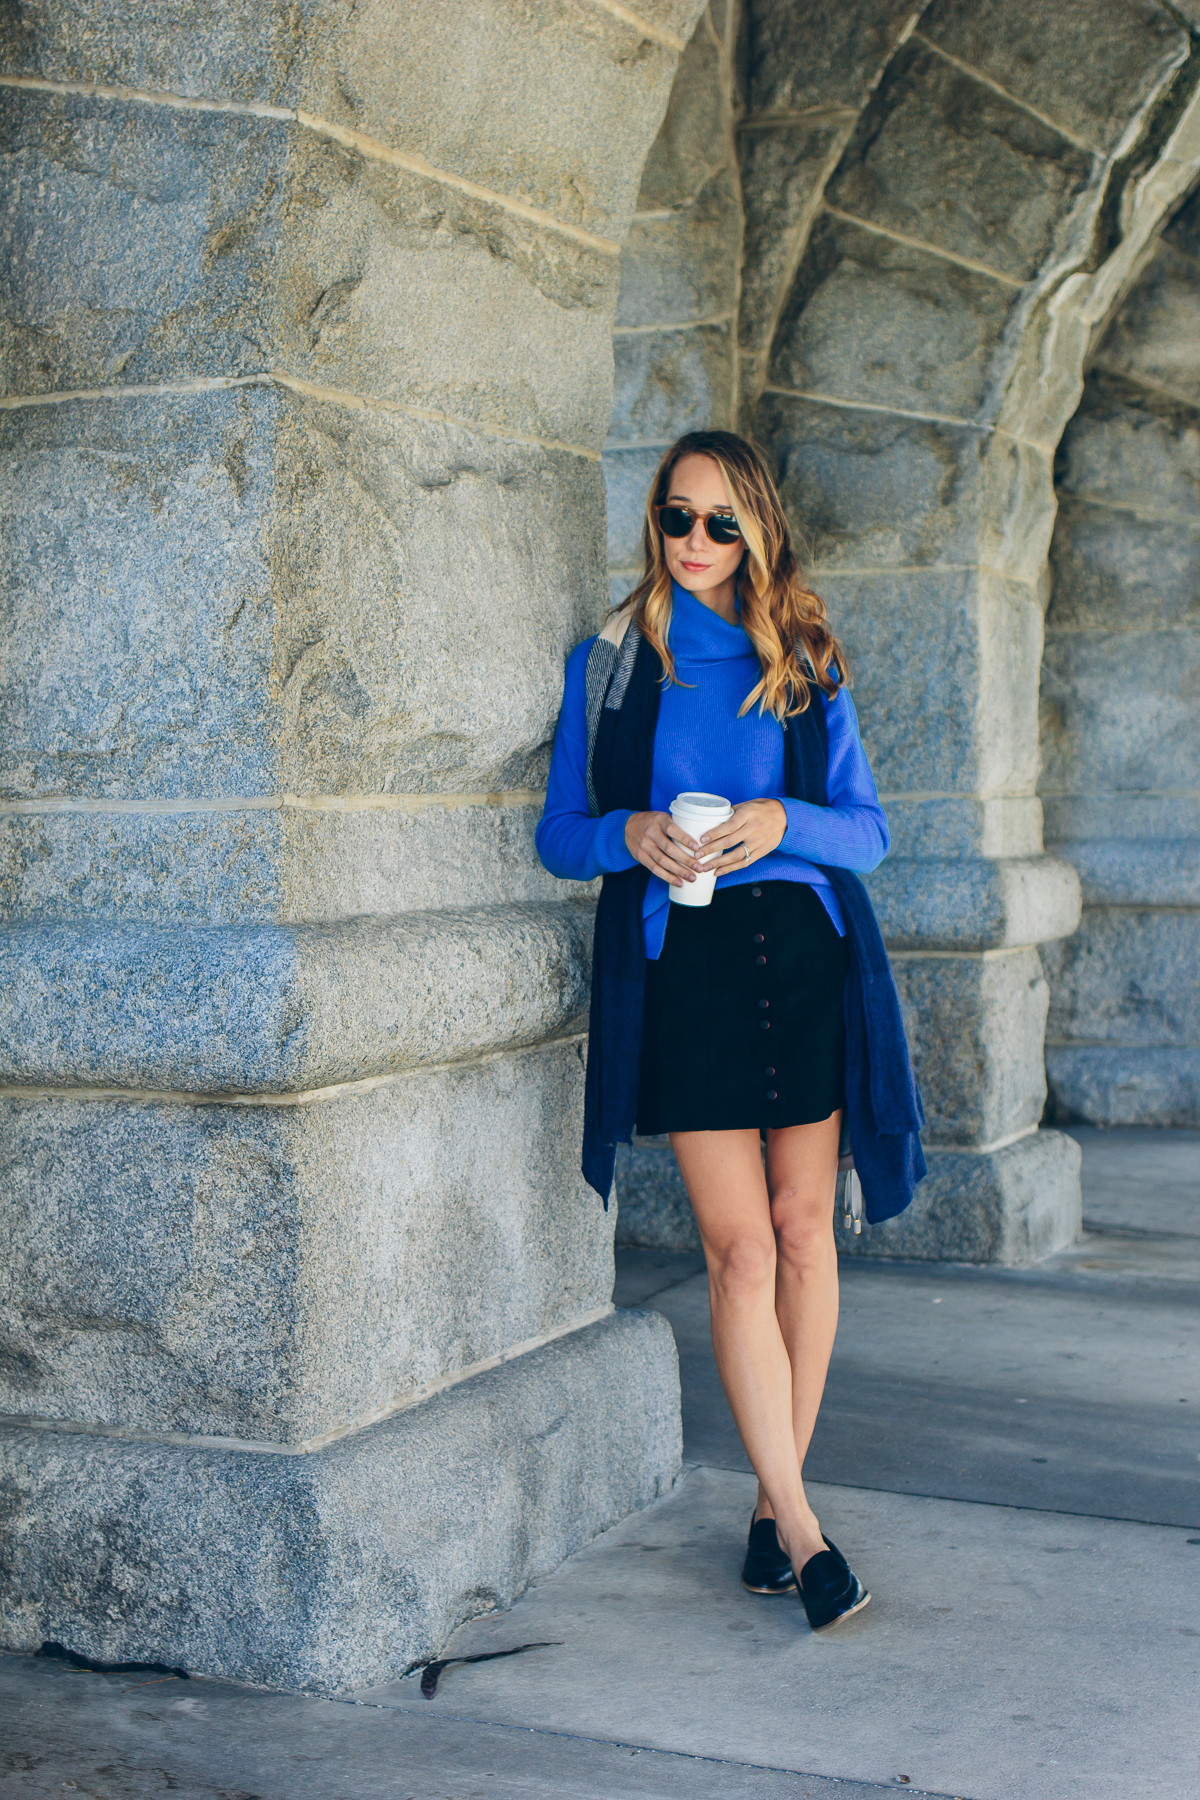 blue cashmere sweater, suede skirt, loafers, plaid scarf, fall fashion, outfit idea — via @TheFoxandShe